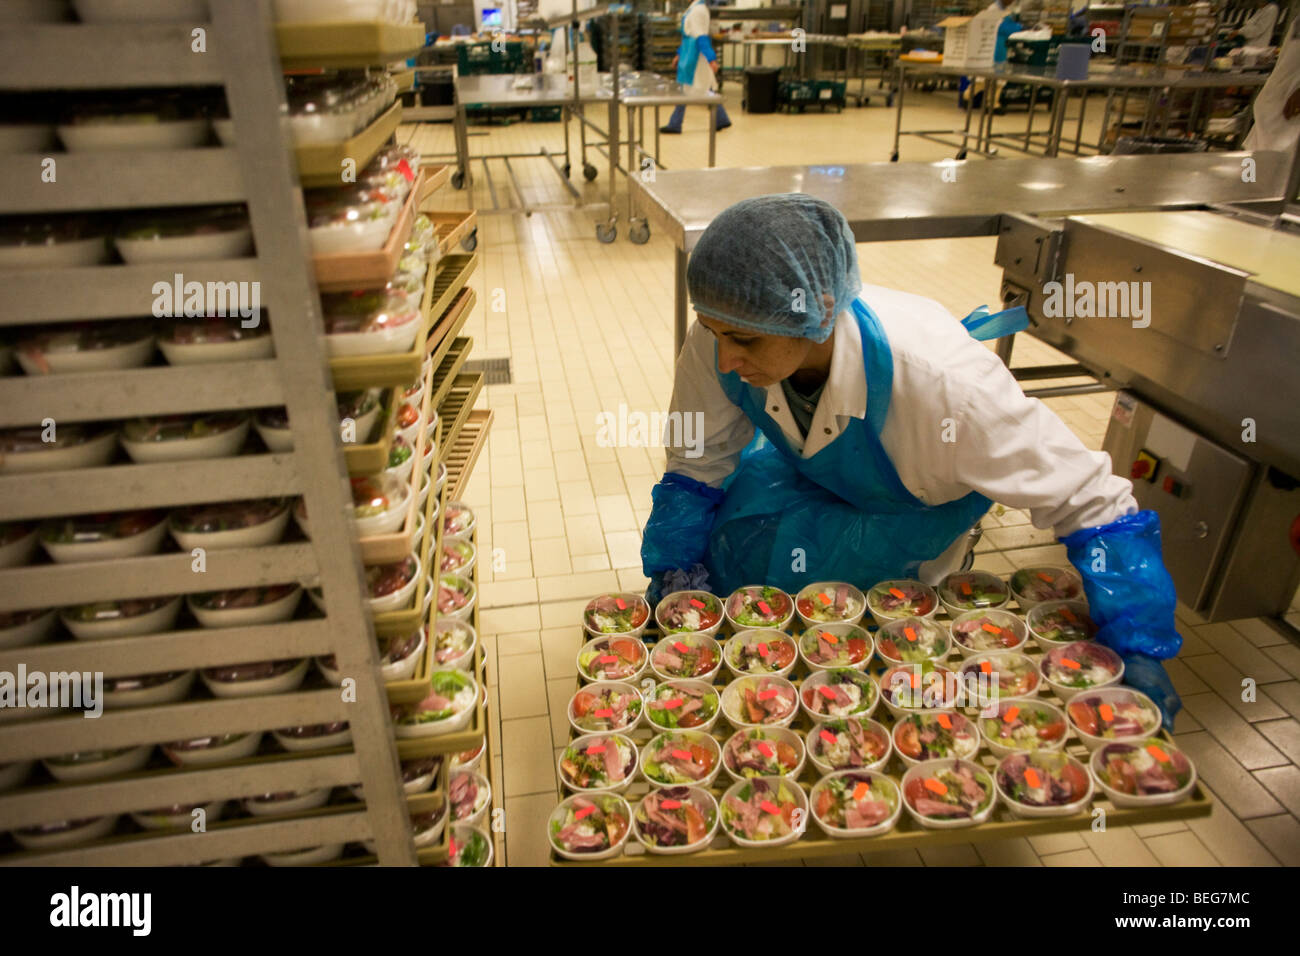 A Female Employee Prepares Salads Destined For Airline Meals By Gate Stock Photo Alamy